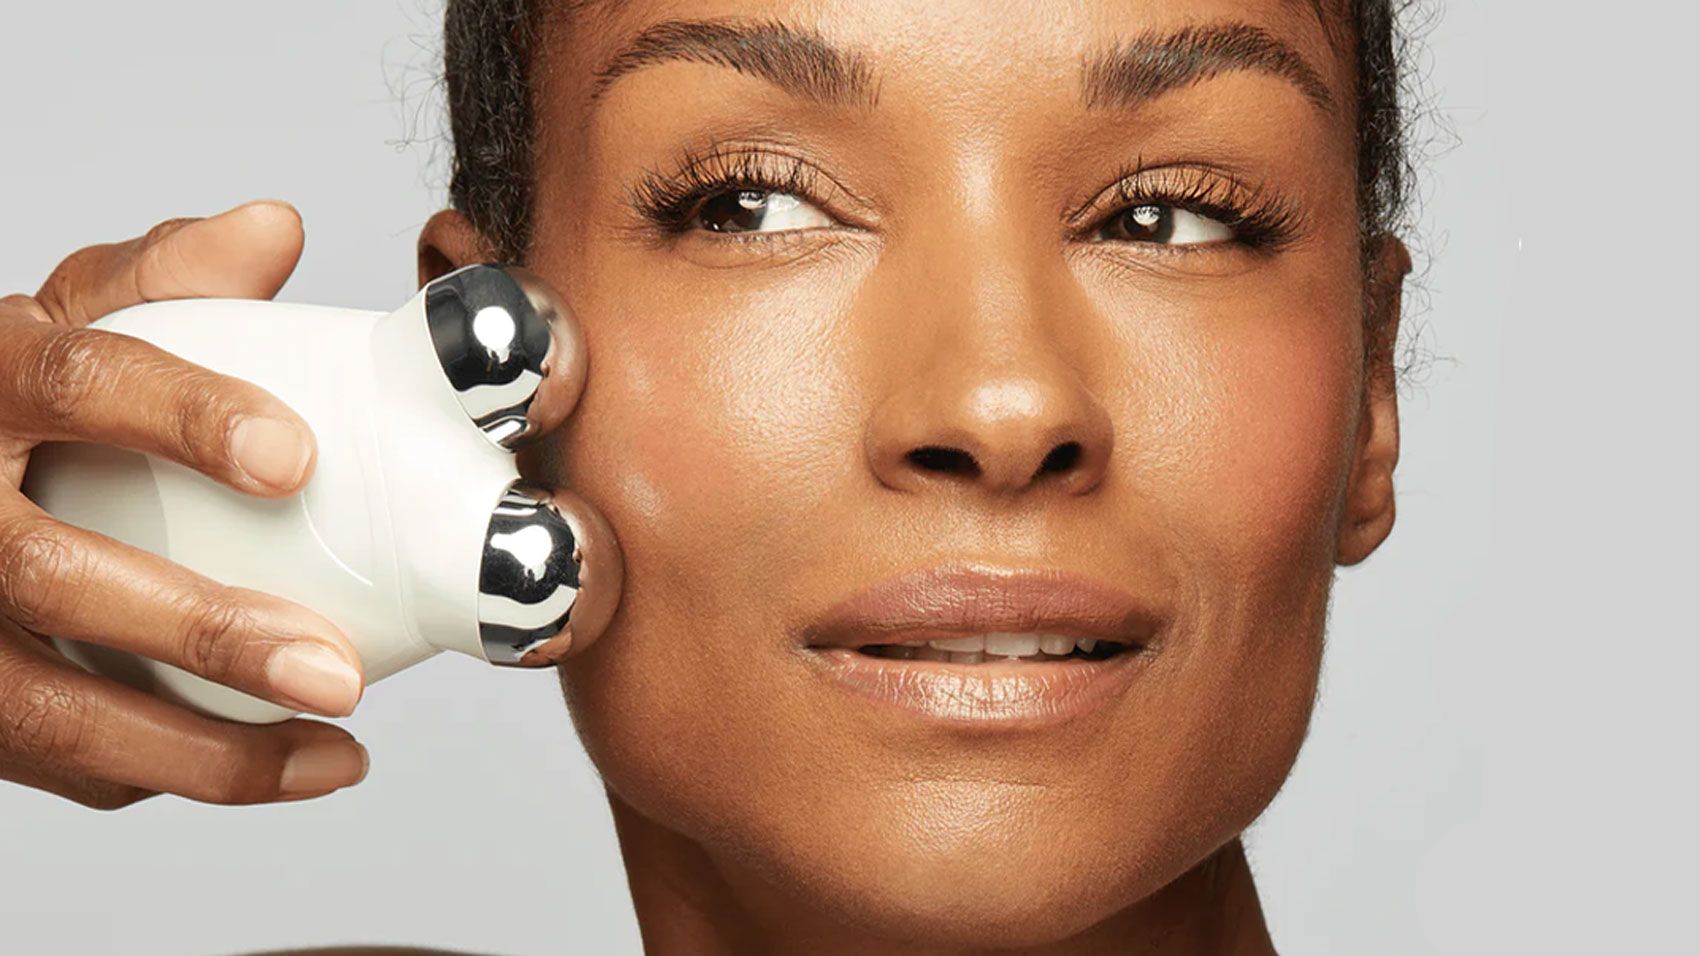 The 9 best microcurrent devices for a sculpted face | CNN Underscored